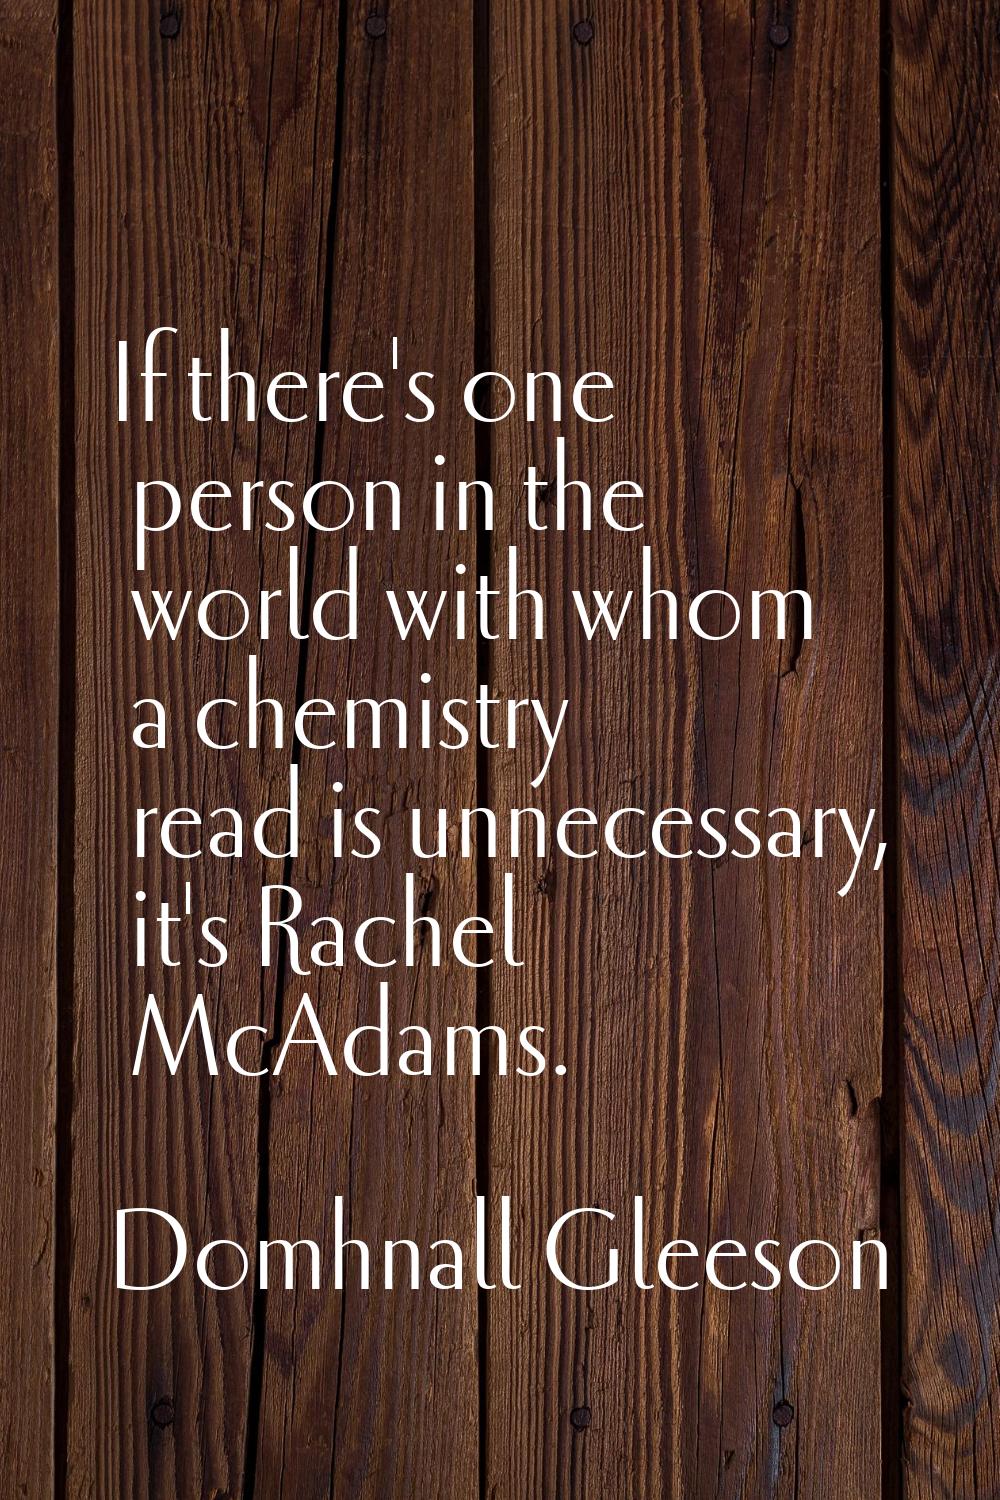 If there's one person in the world with whom a chemistry read is unnecessary, it's Rachel McAdams.